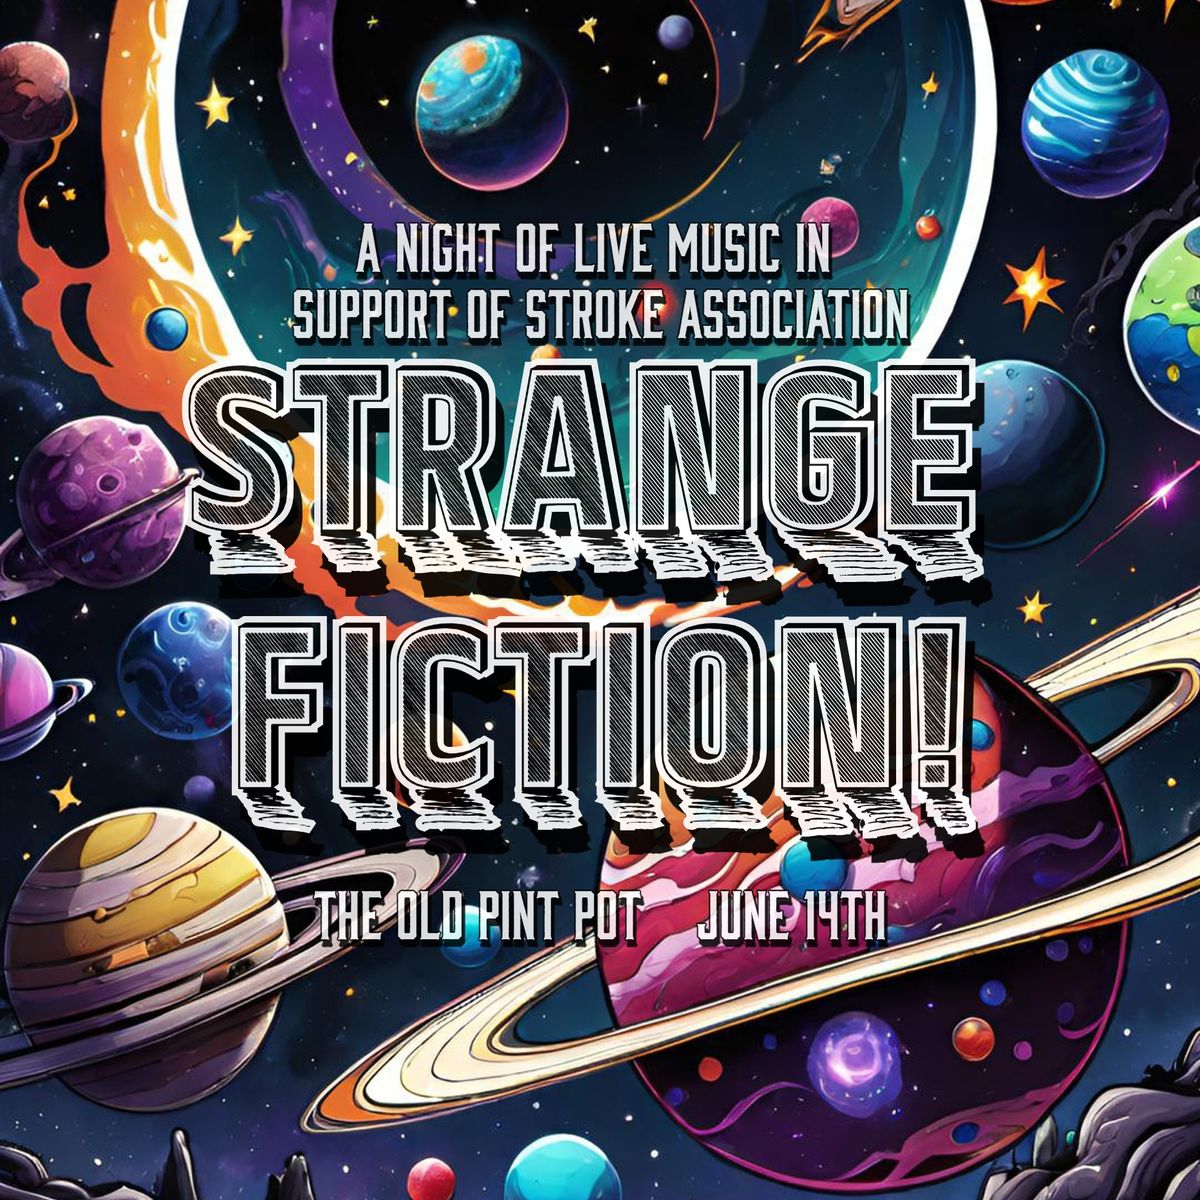 STRANGE FICTION!: A Night Of Live Music In Support Of Stroke Association